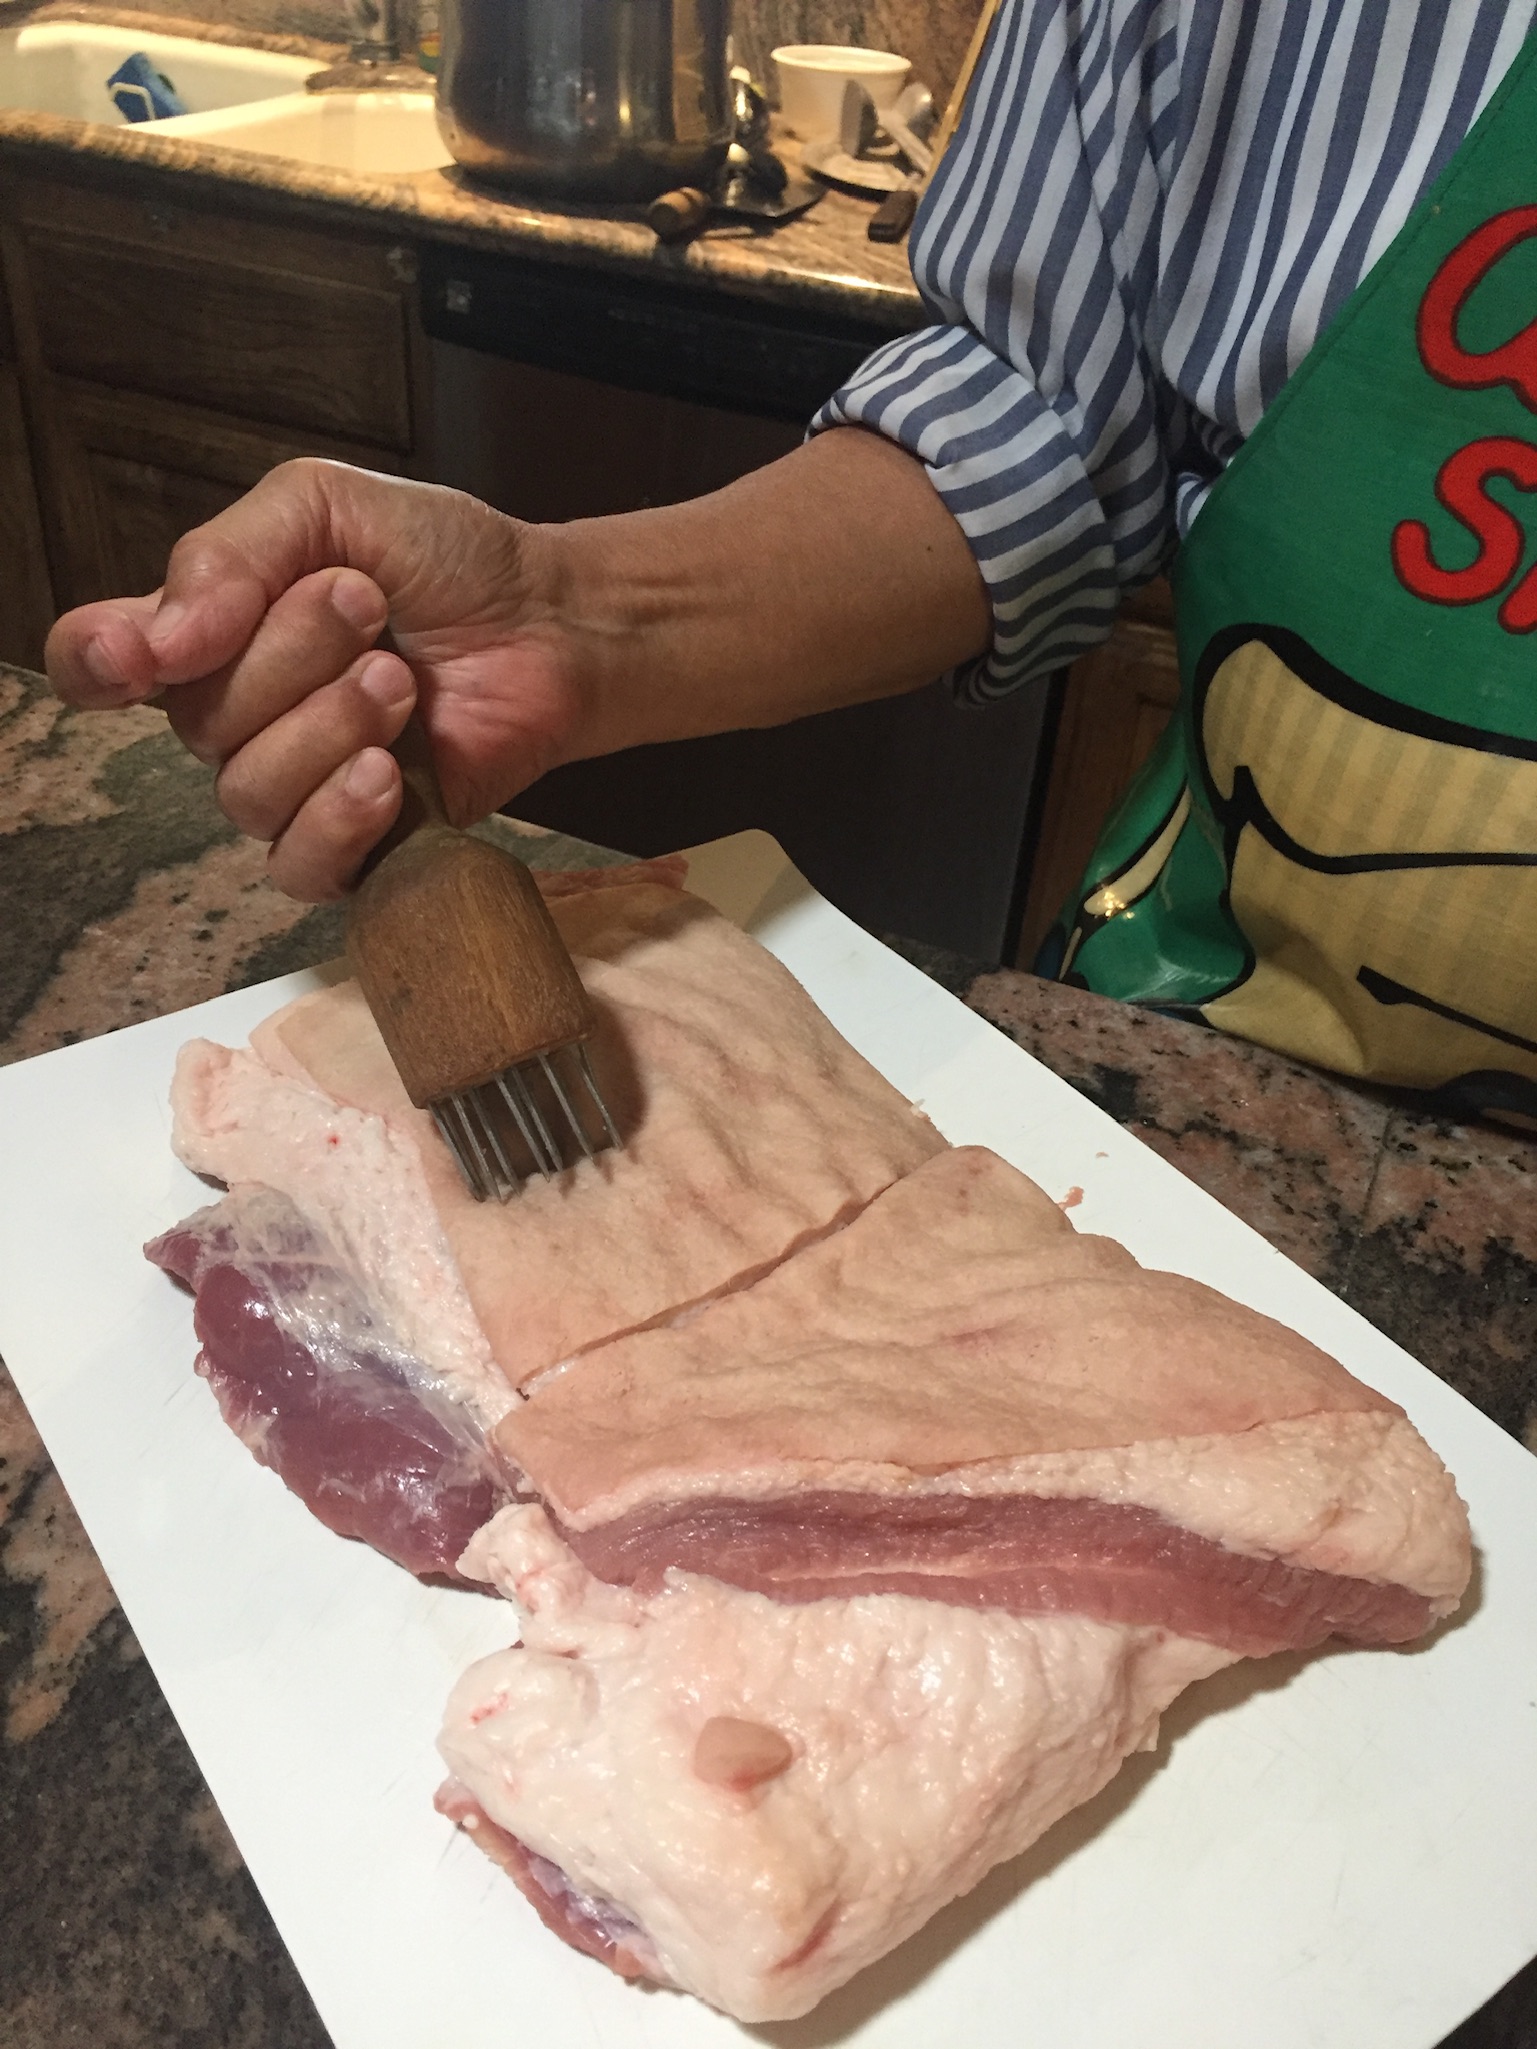 Using the meat tenderizer to puncture the pork skin.